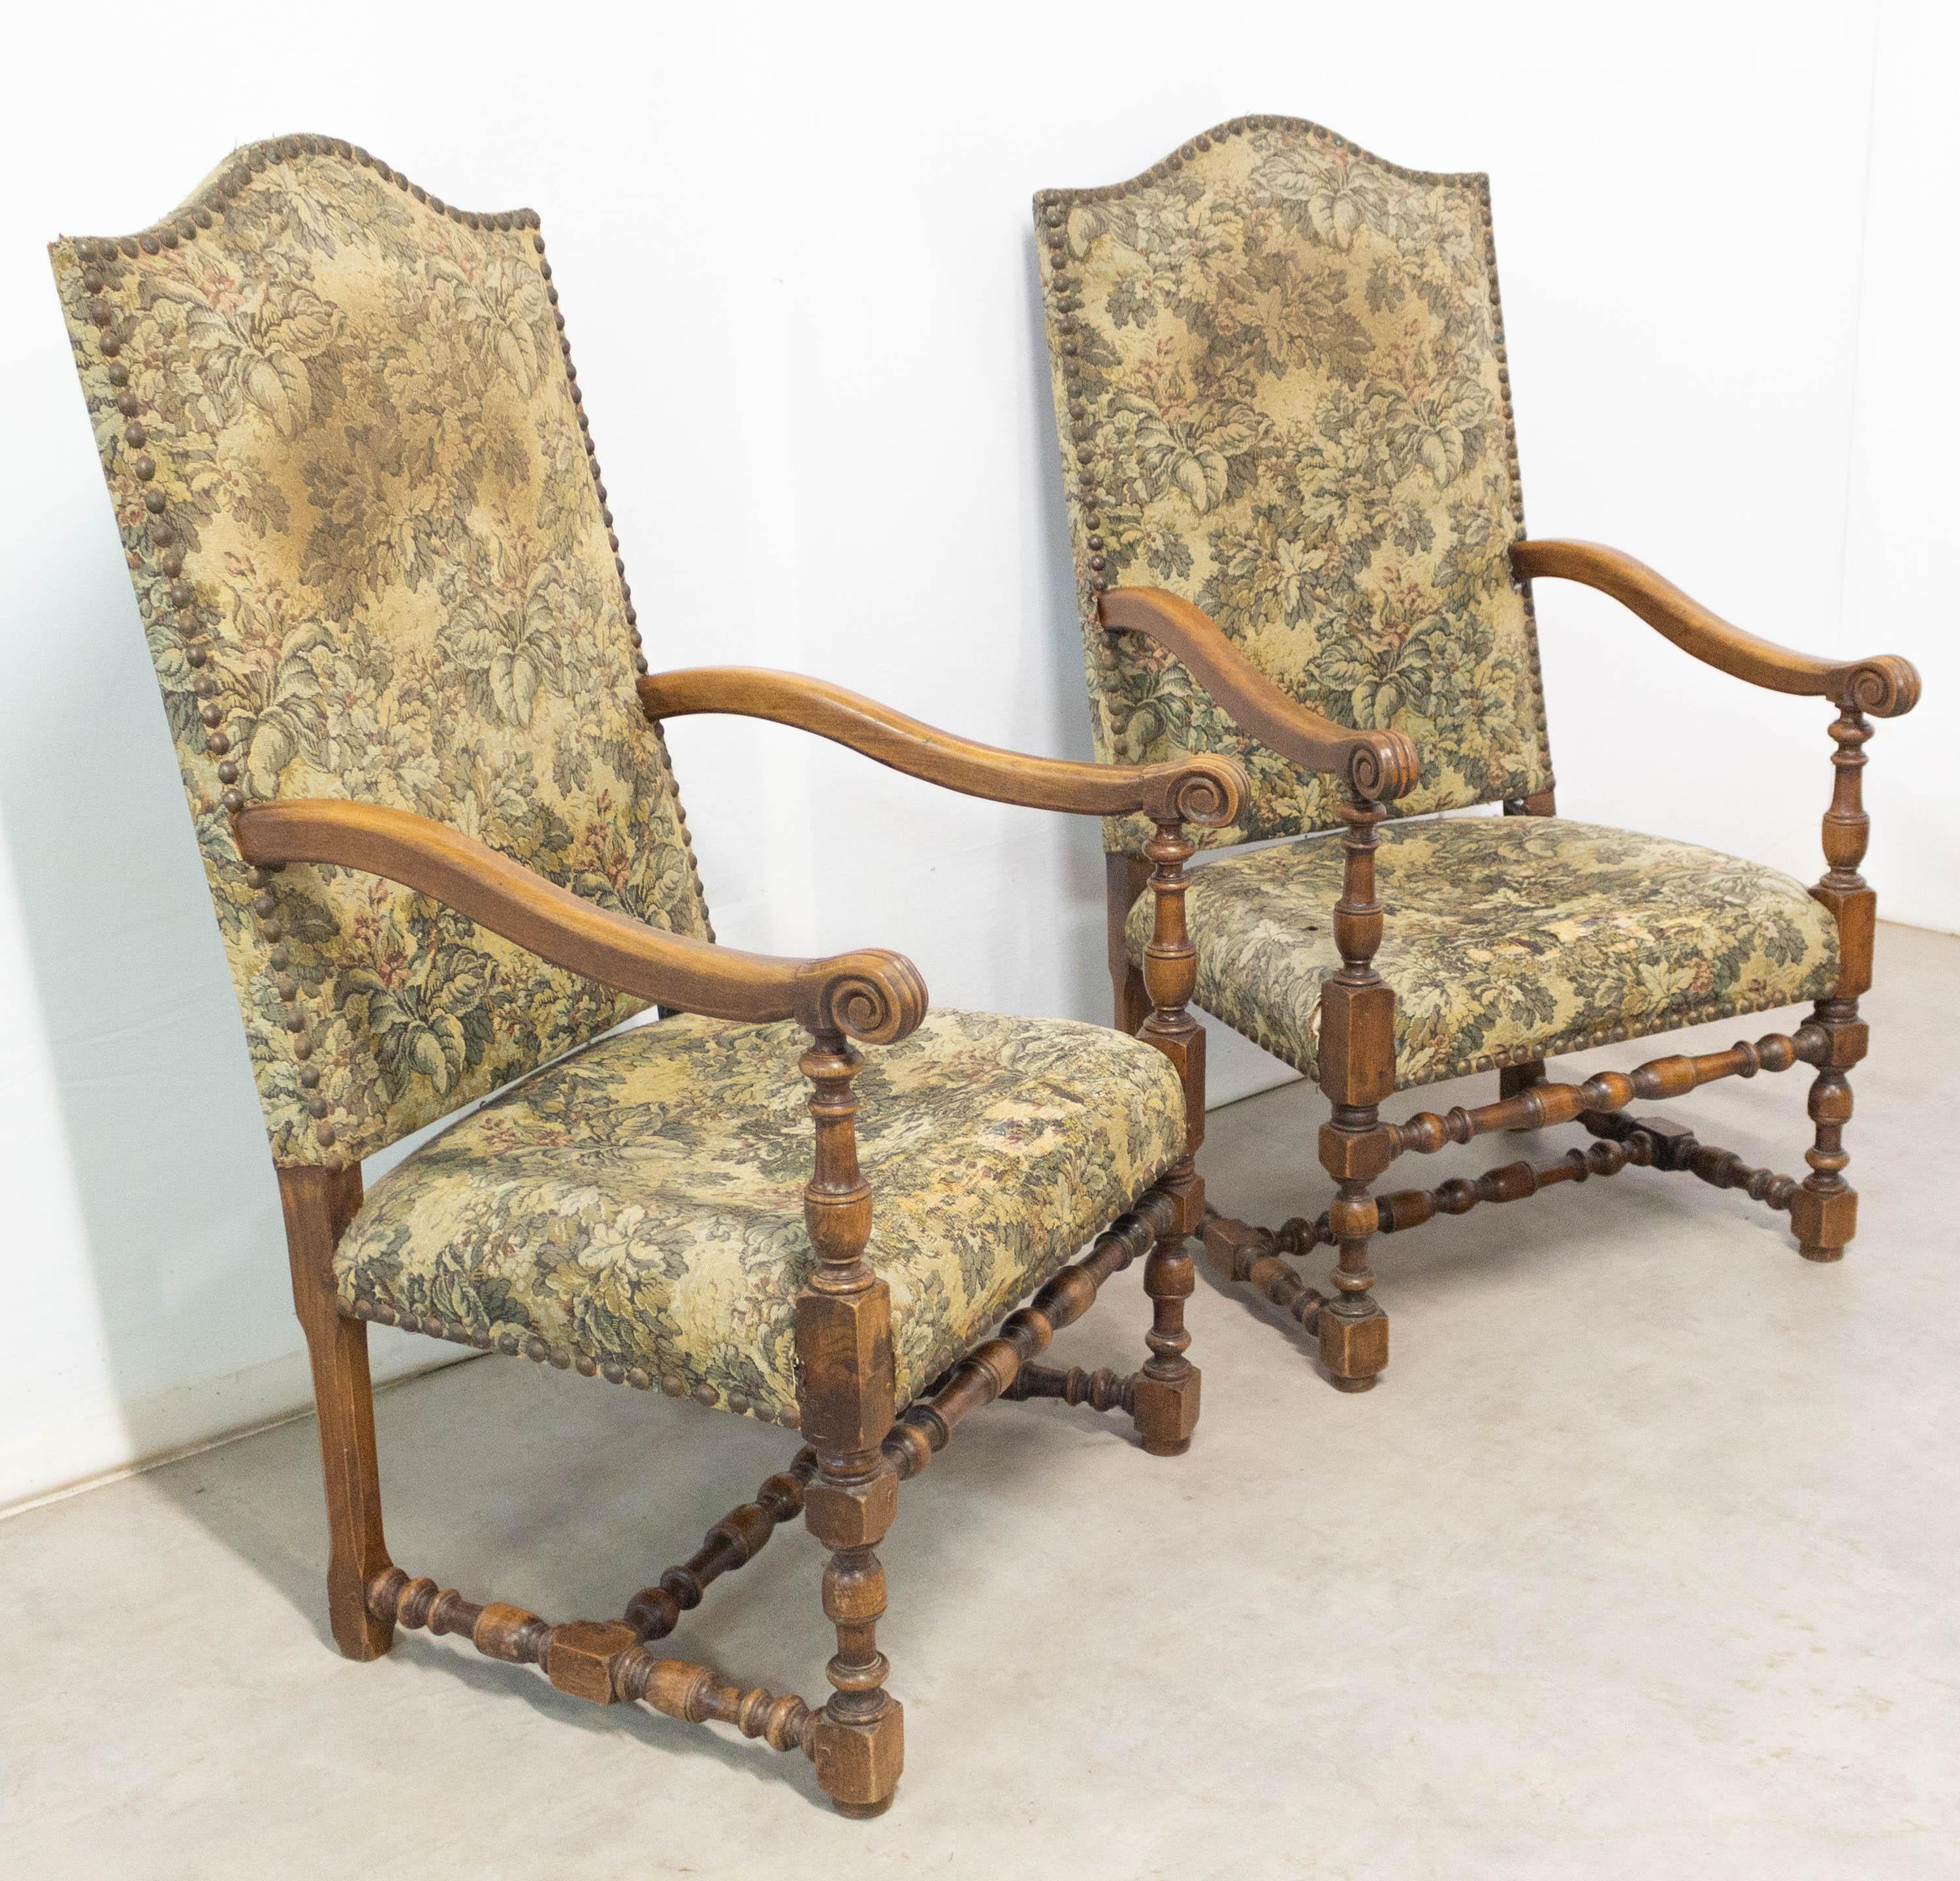 Mid-20th Century Pair of Louis XIV Revival Armchairs French, Midcentury to Be Re-Upholstered